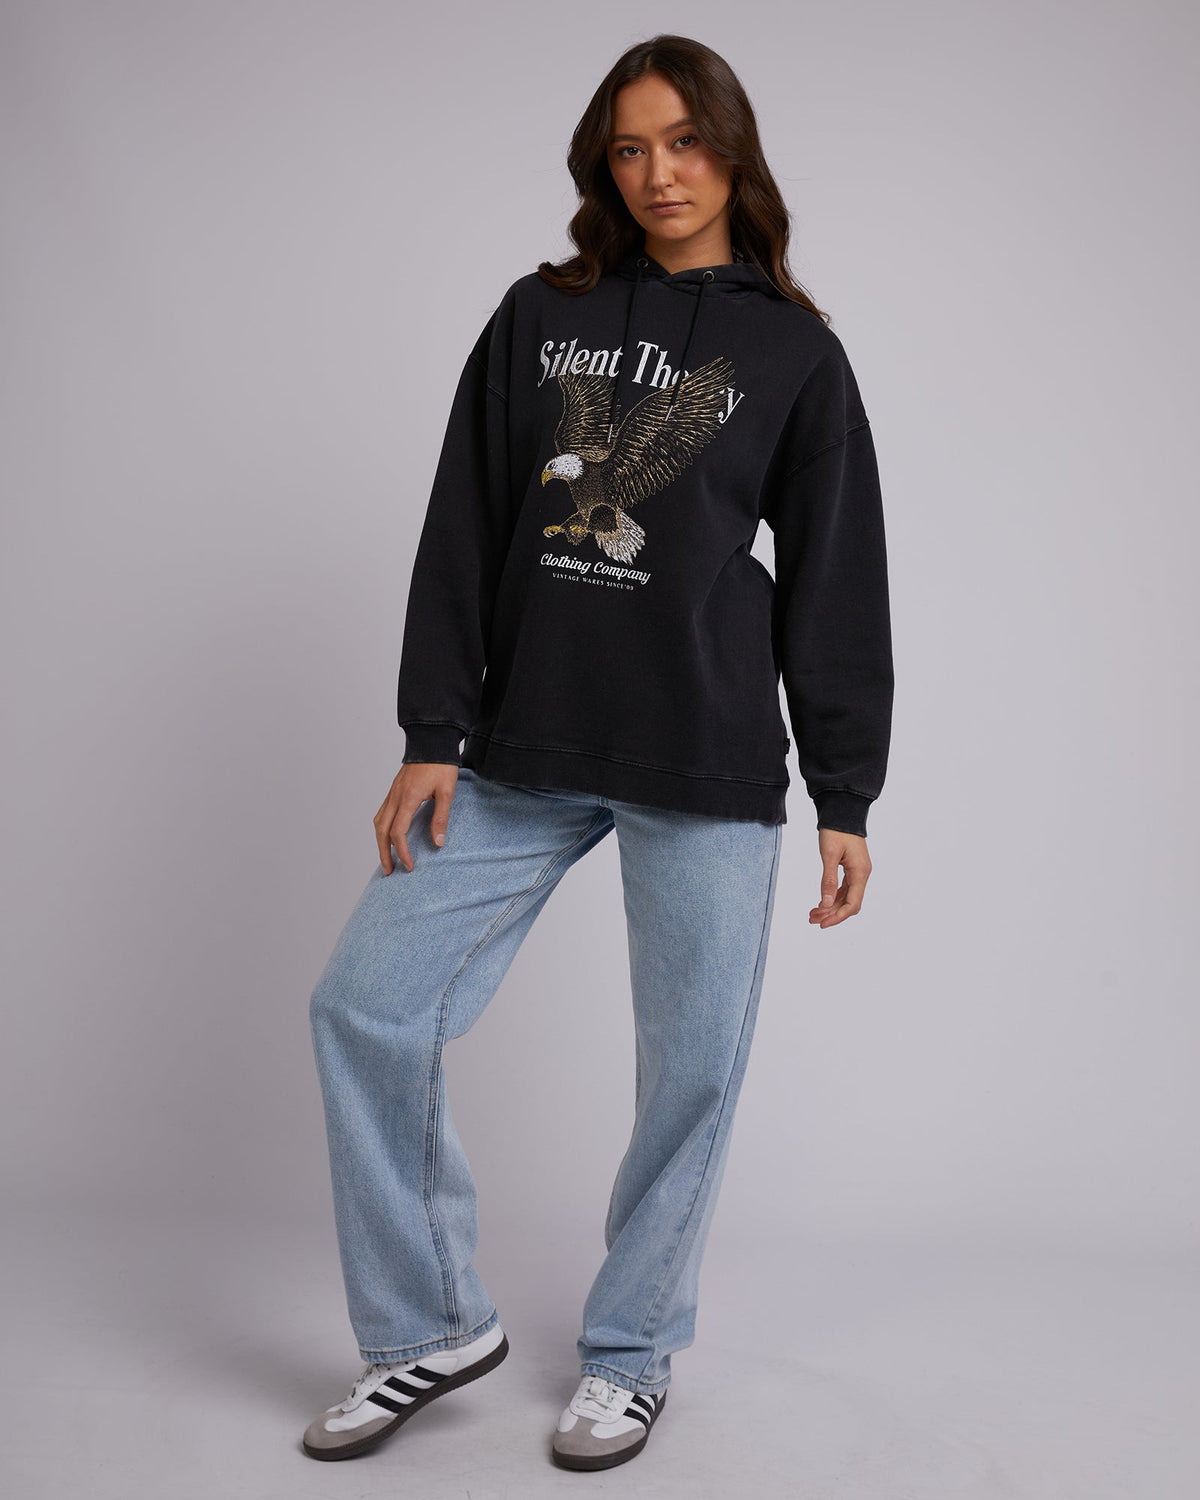 Silent Theory Ladies-Fearless Fly Hoody Washed Black-Edge Clothing